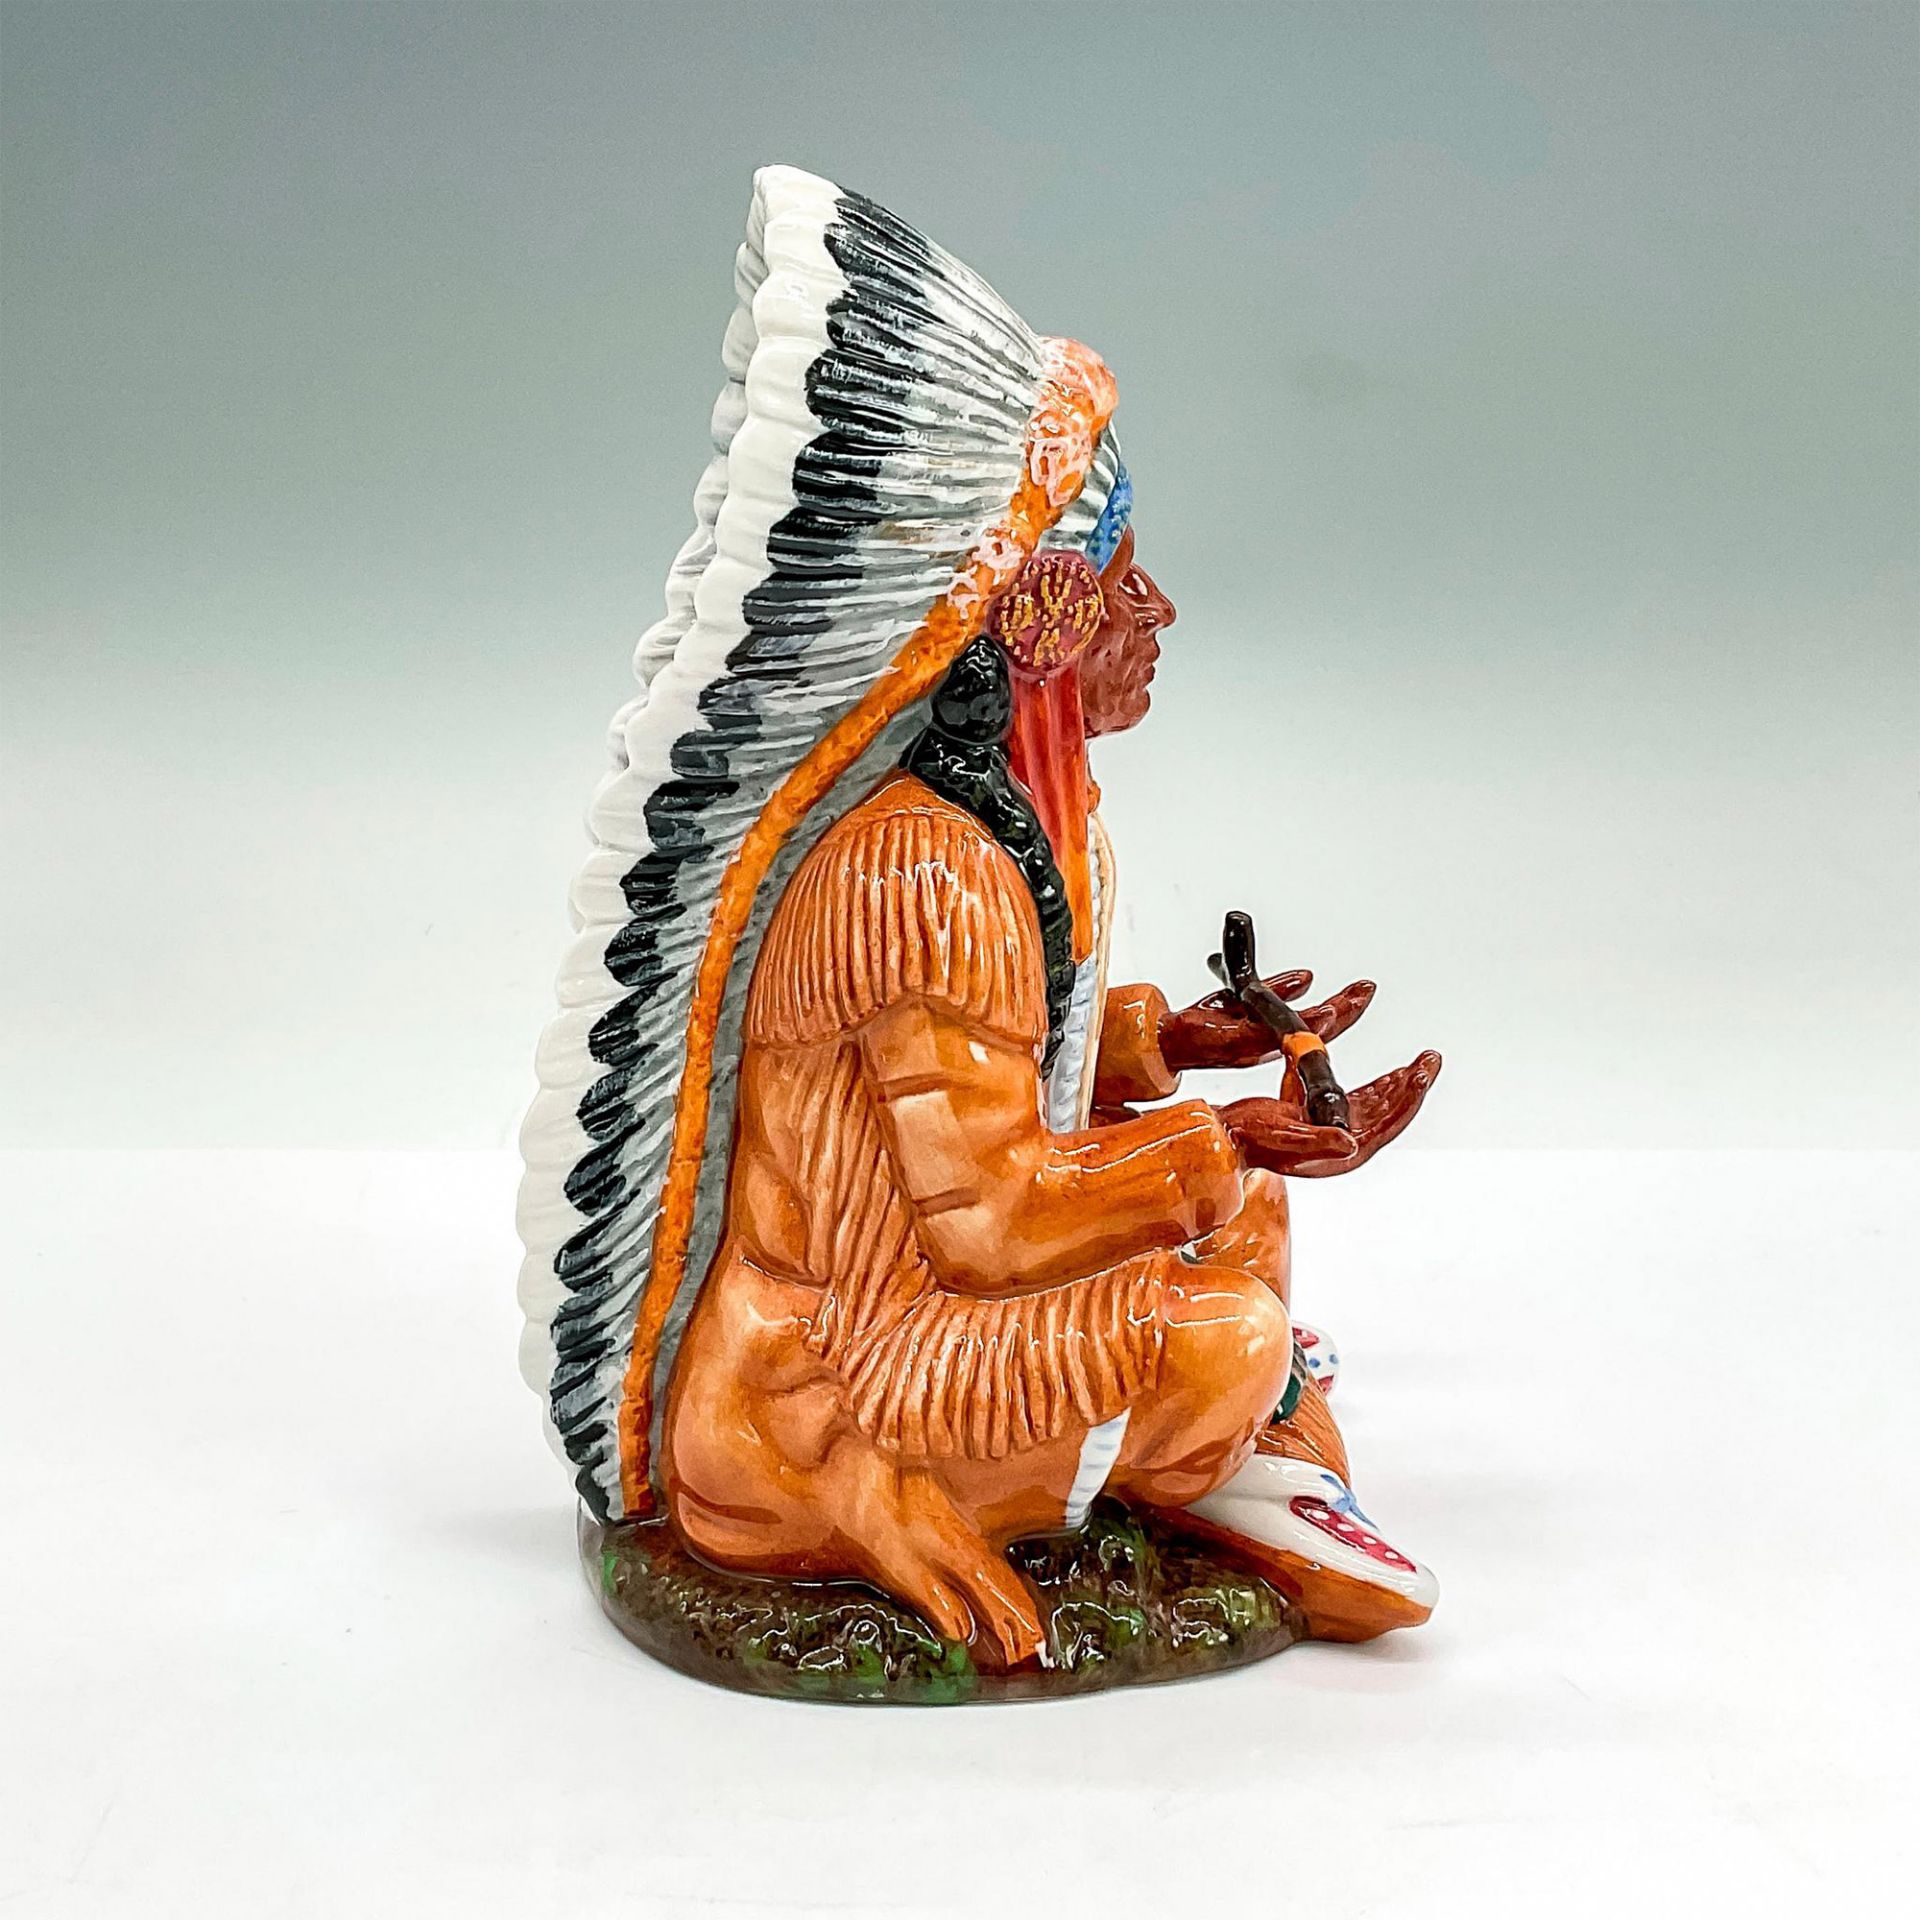 Chief - HN2892 - Royal Doulton Figurine - Image 2 of 4